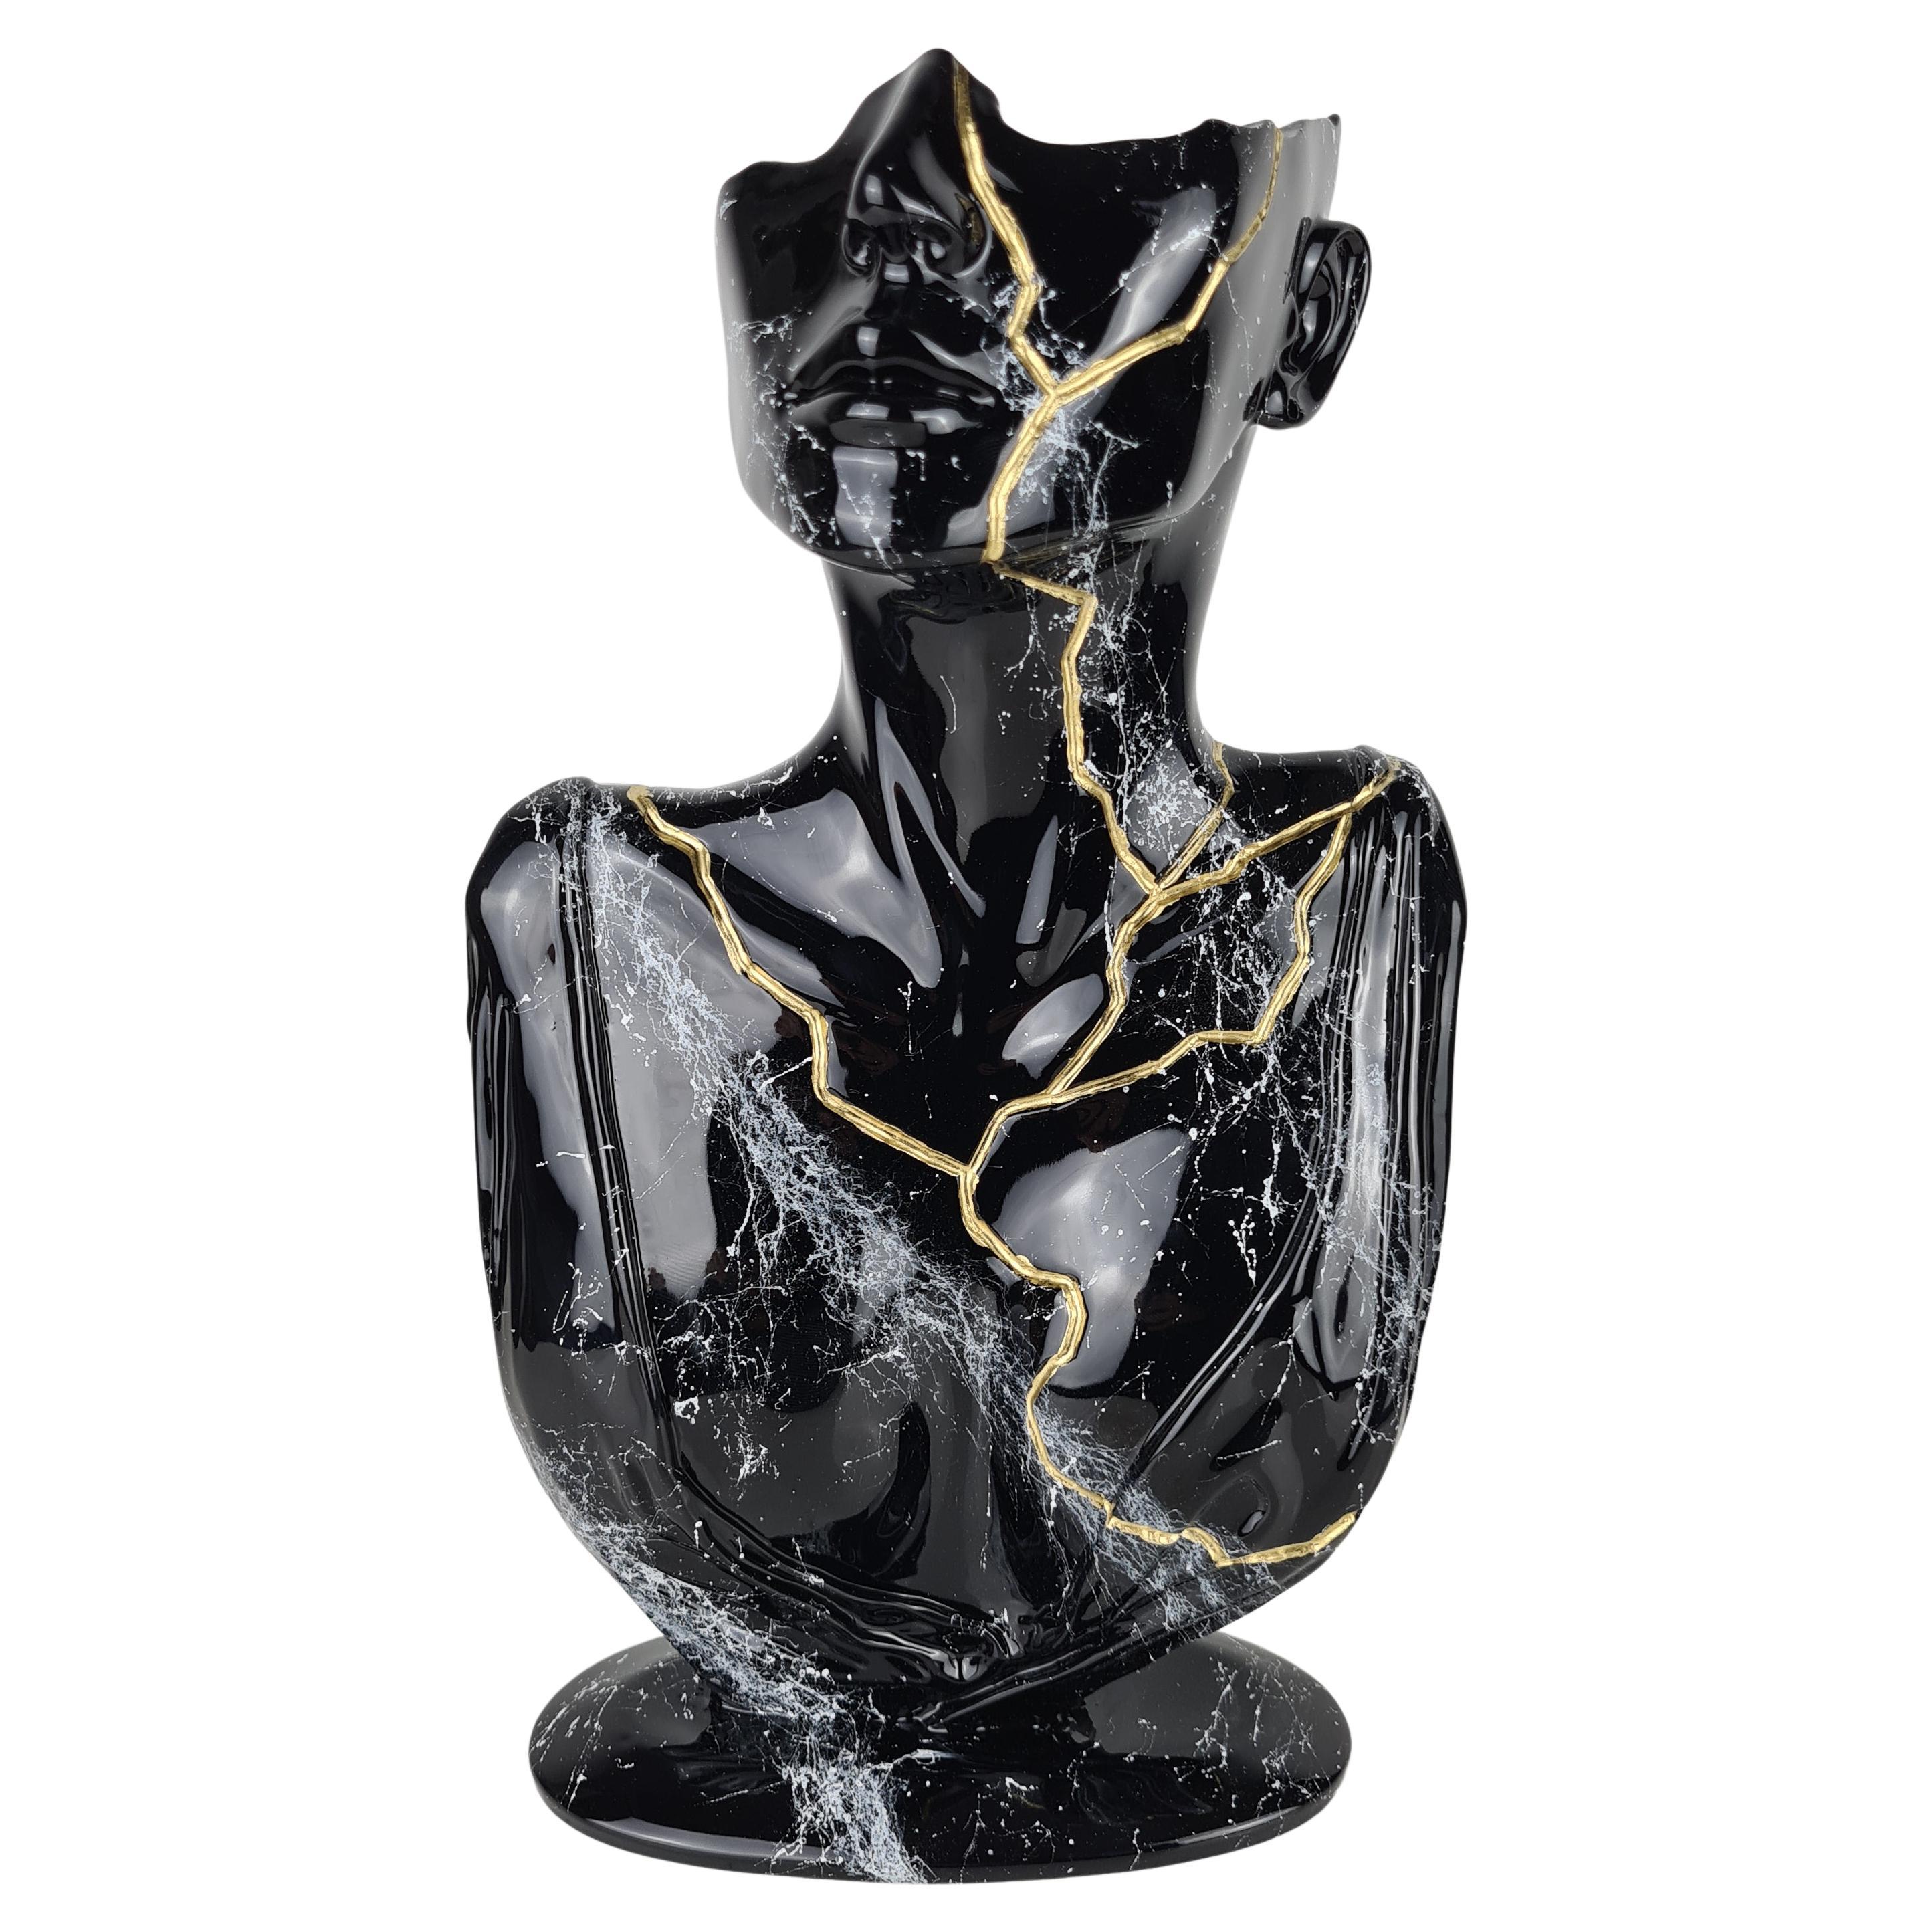 "Tired Face", Black & Gold, 2021, Sculpture with Marble Powder and Resin. Ltd.